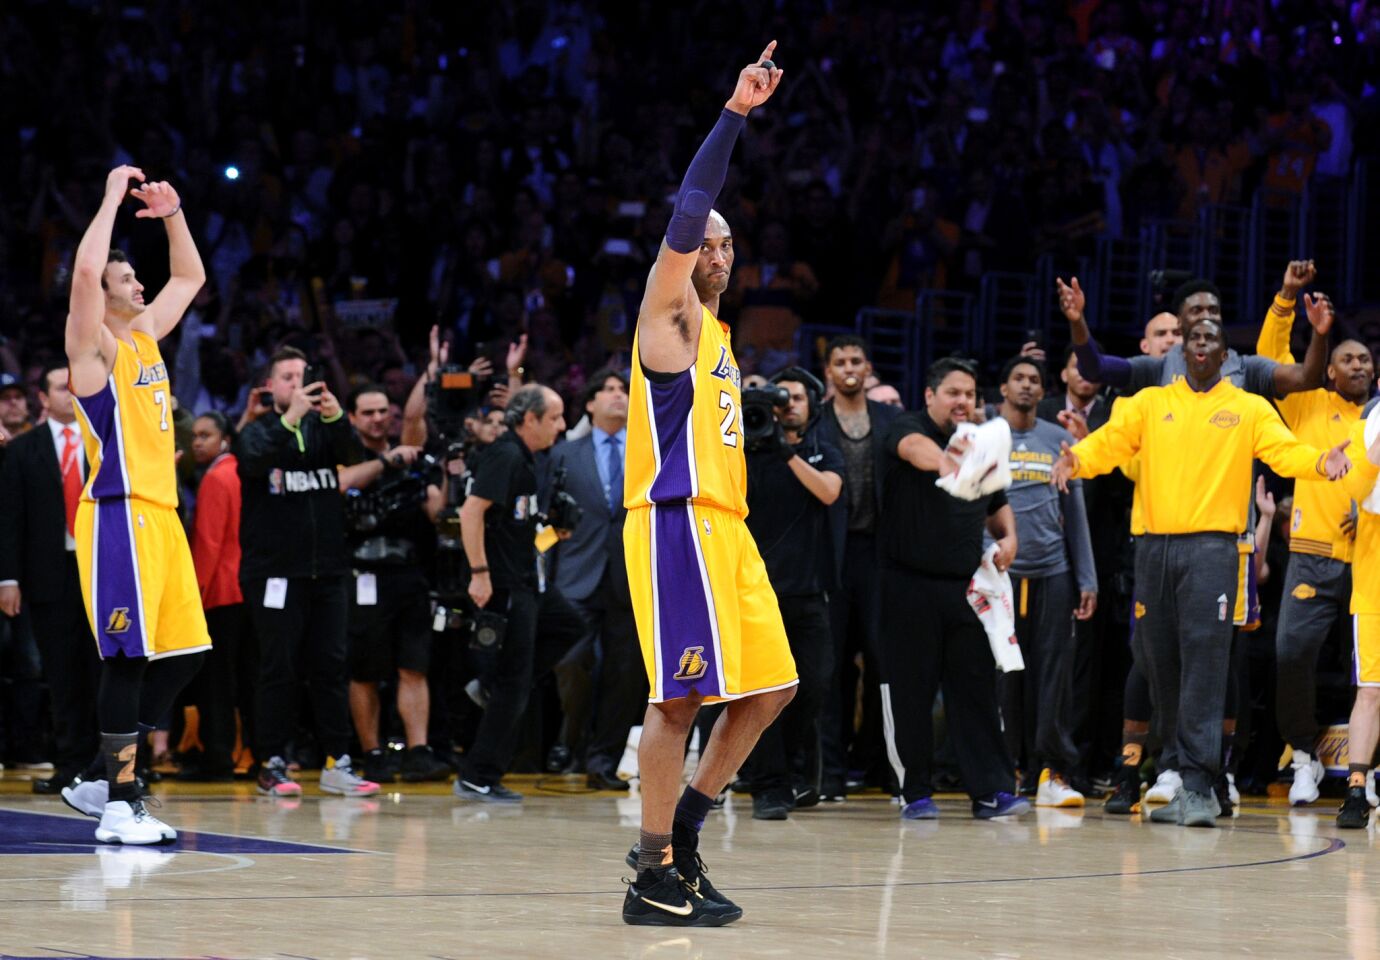 Kobe Bryant waves goodbye to the crowd after his final game at the Staples Center.